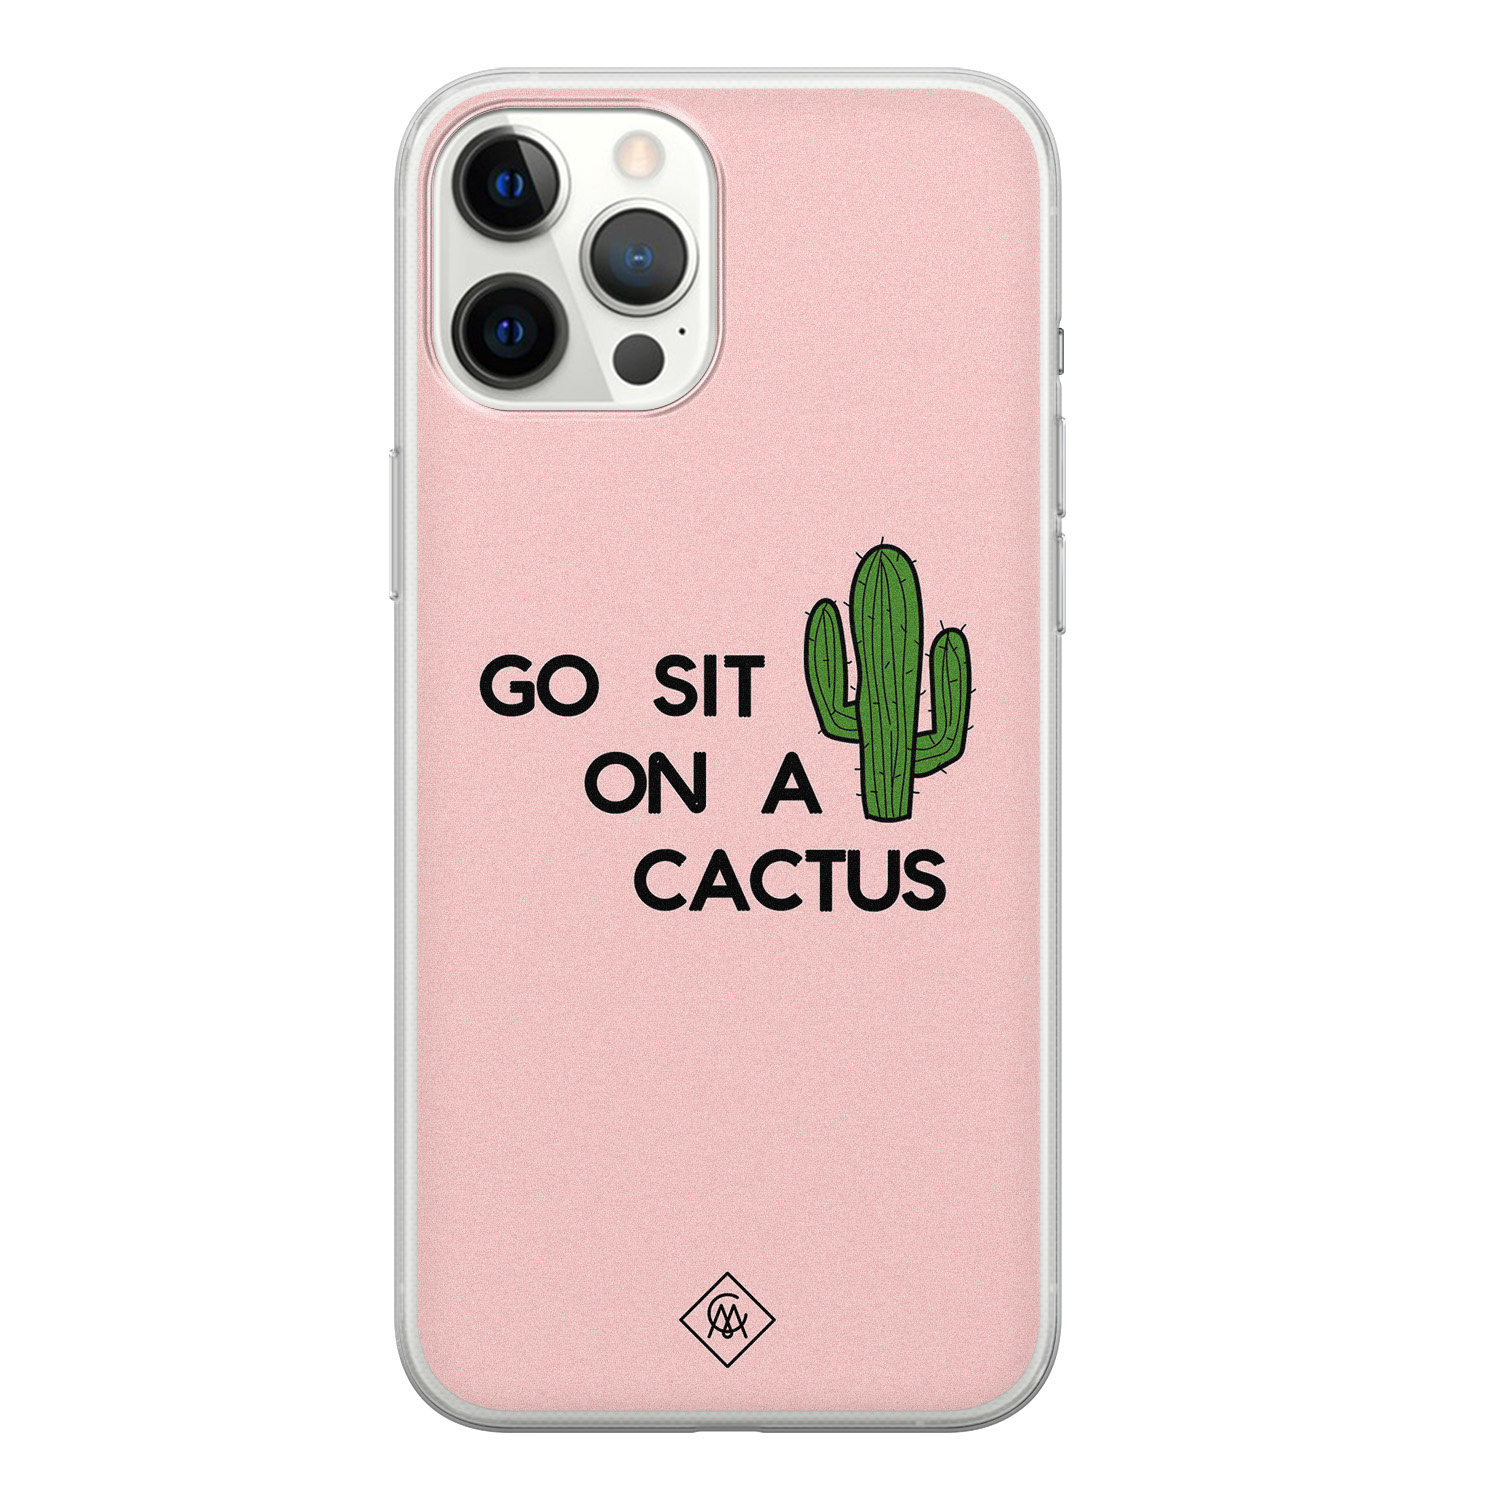 iPhone 12 Pro Max siliconen hoesje - Go sit on a cactus